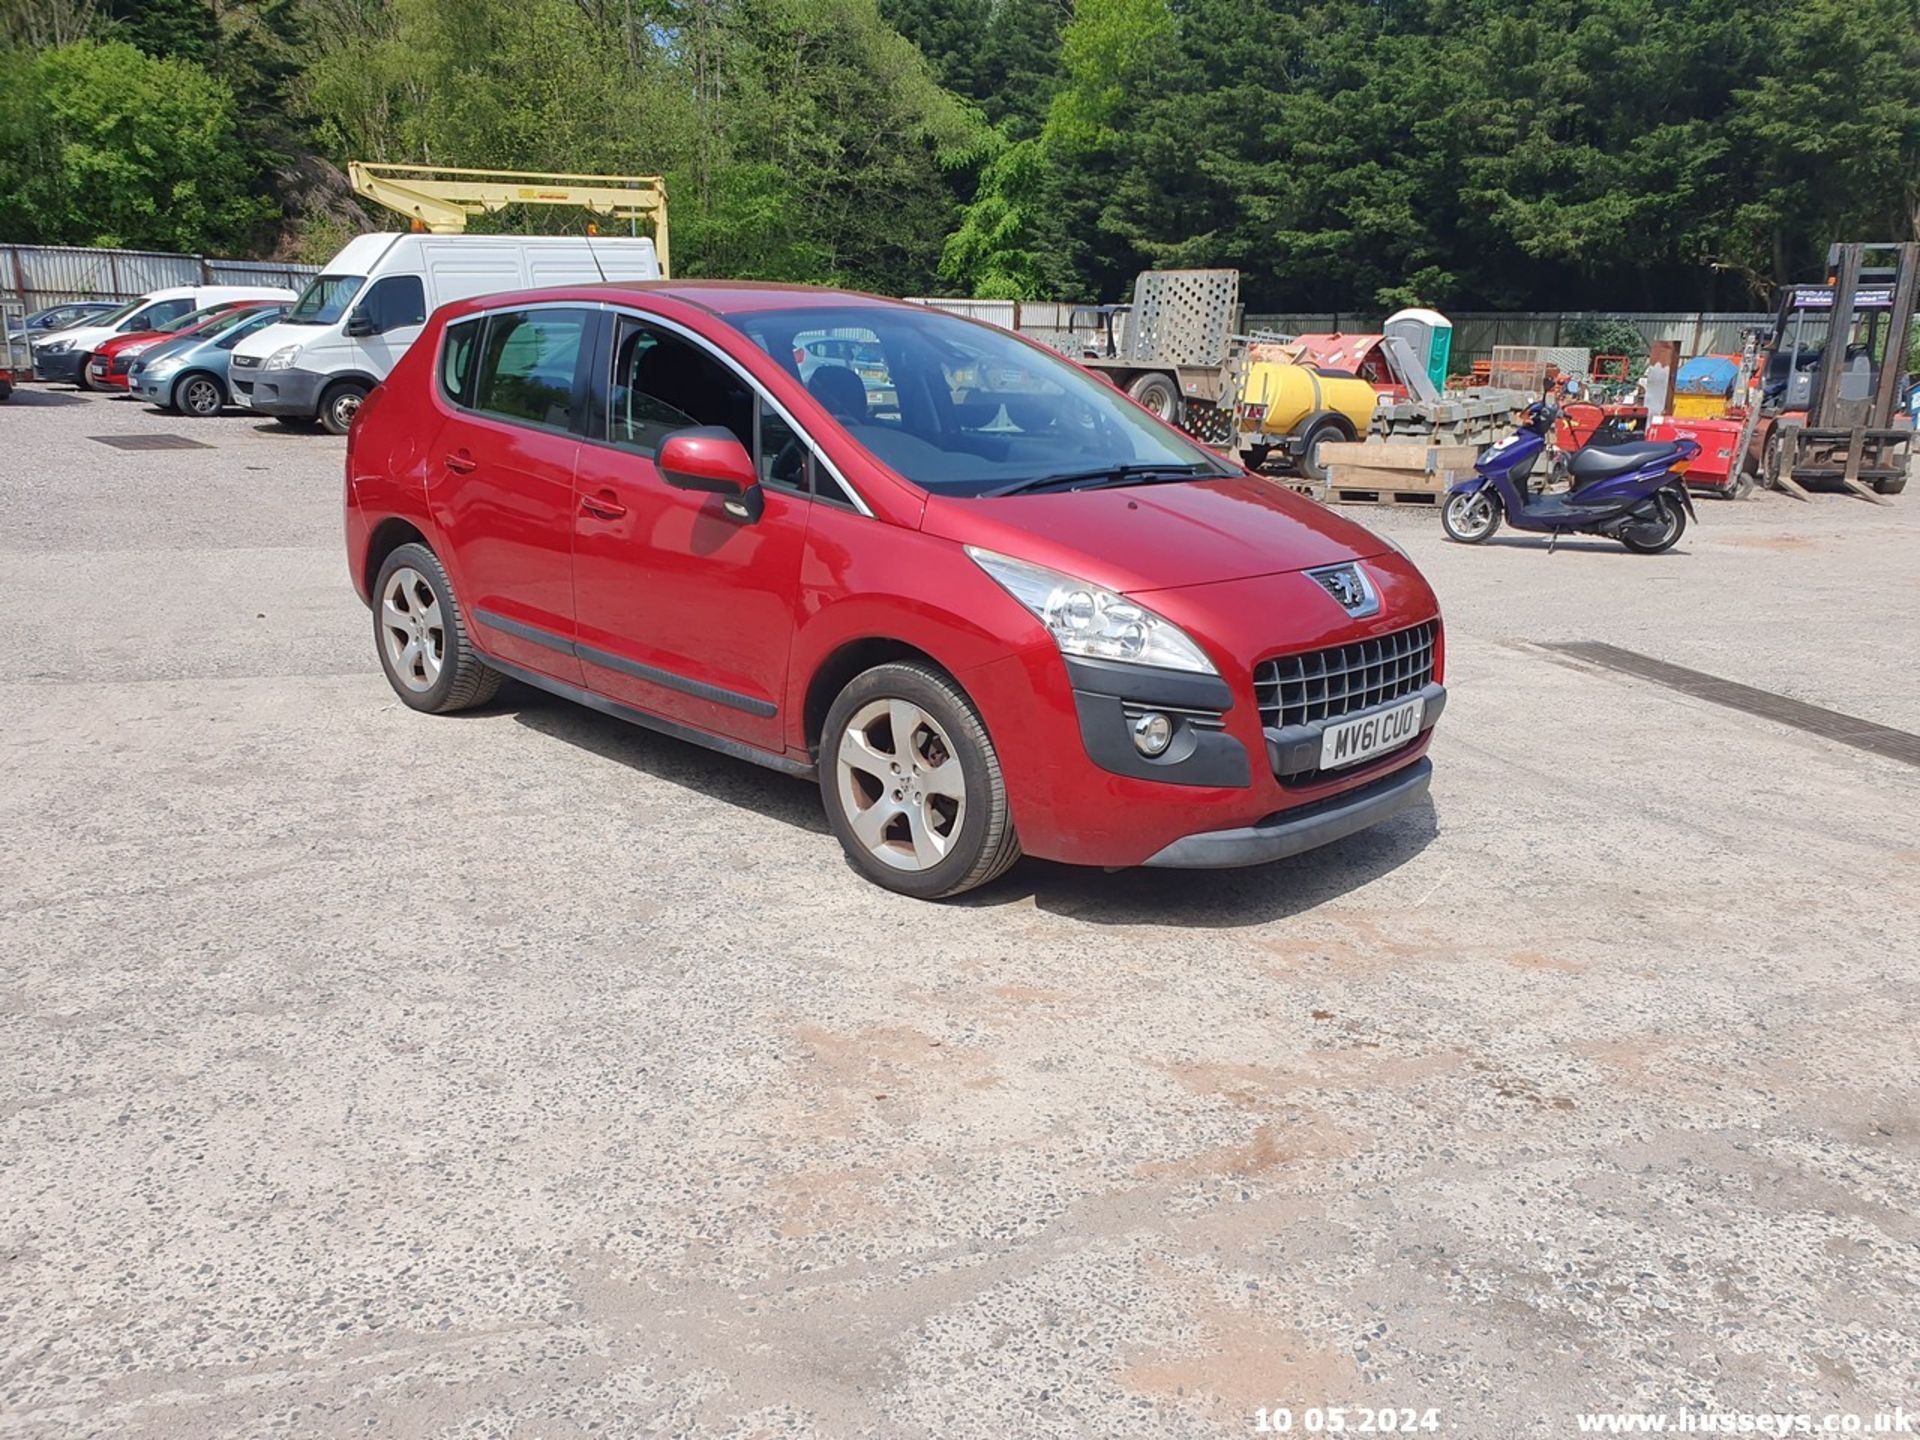 11/61 PEUGEOT 3008 SPORT E-HDI S-A - 1560cc 5dr Hatchback (Red, 89k) - Image 4 of 49